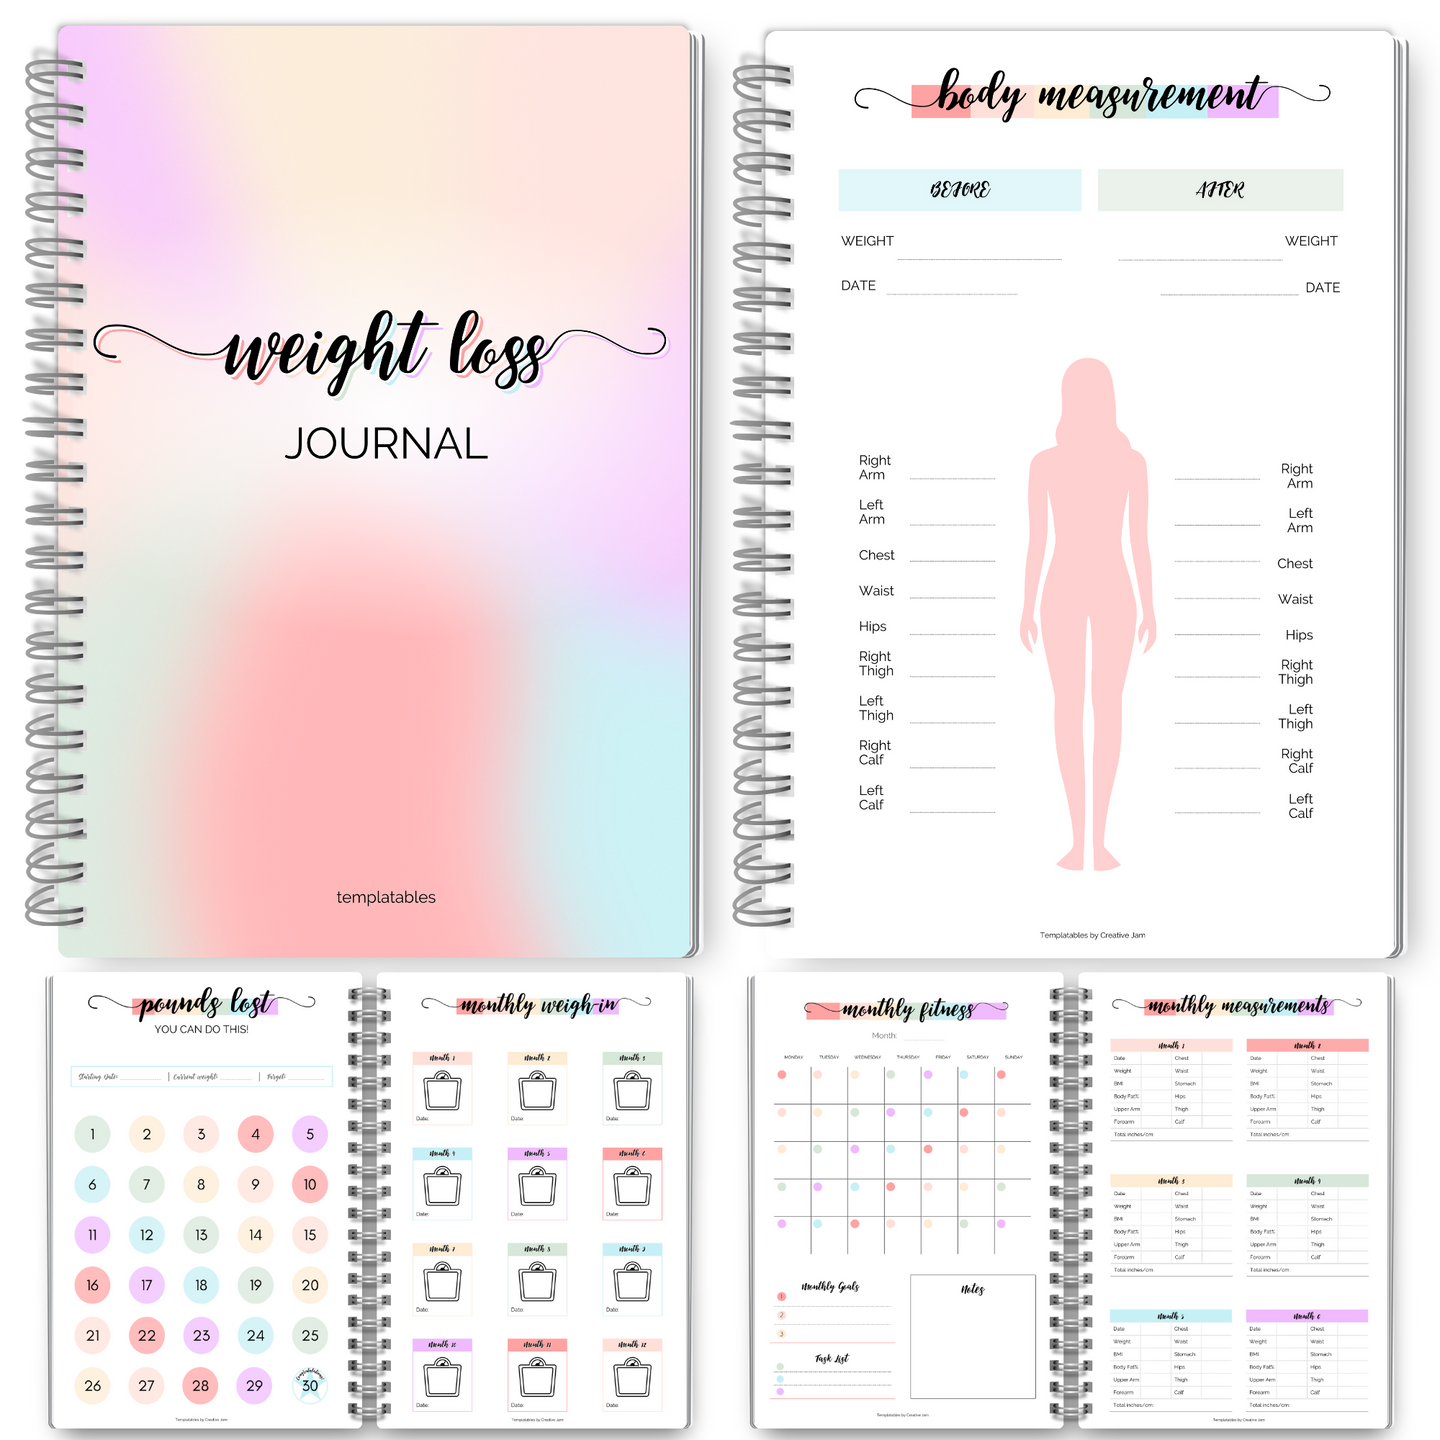 12 Week Weight Loss Journal | Pounds Lost & Body Measurements Tracker | A5 Pastel Rainbow